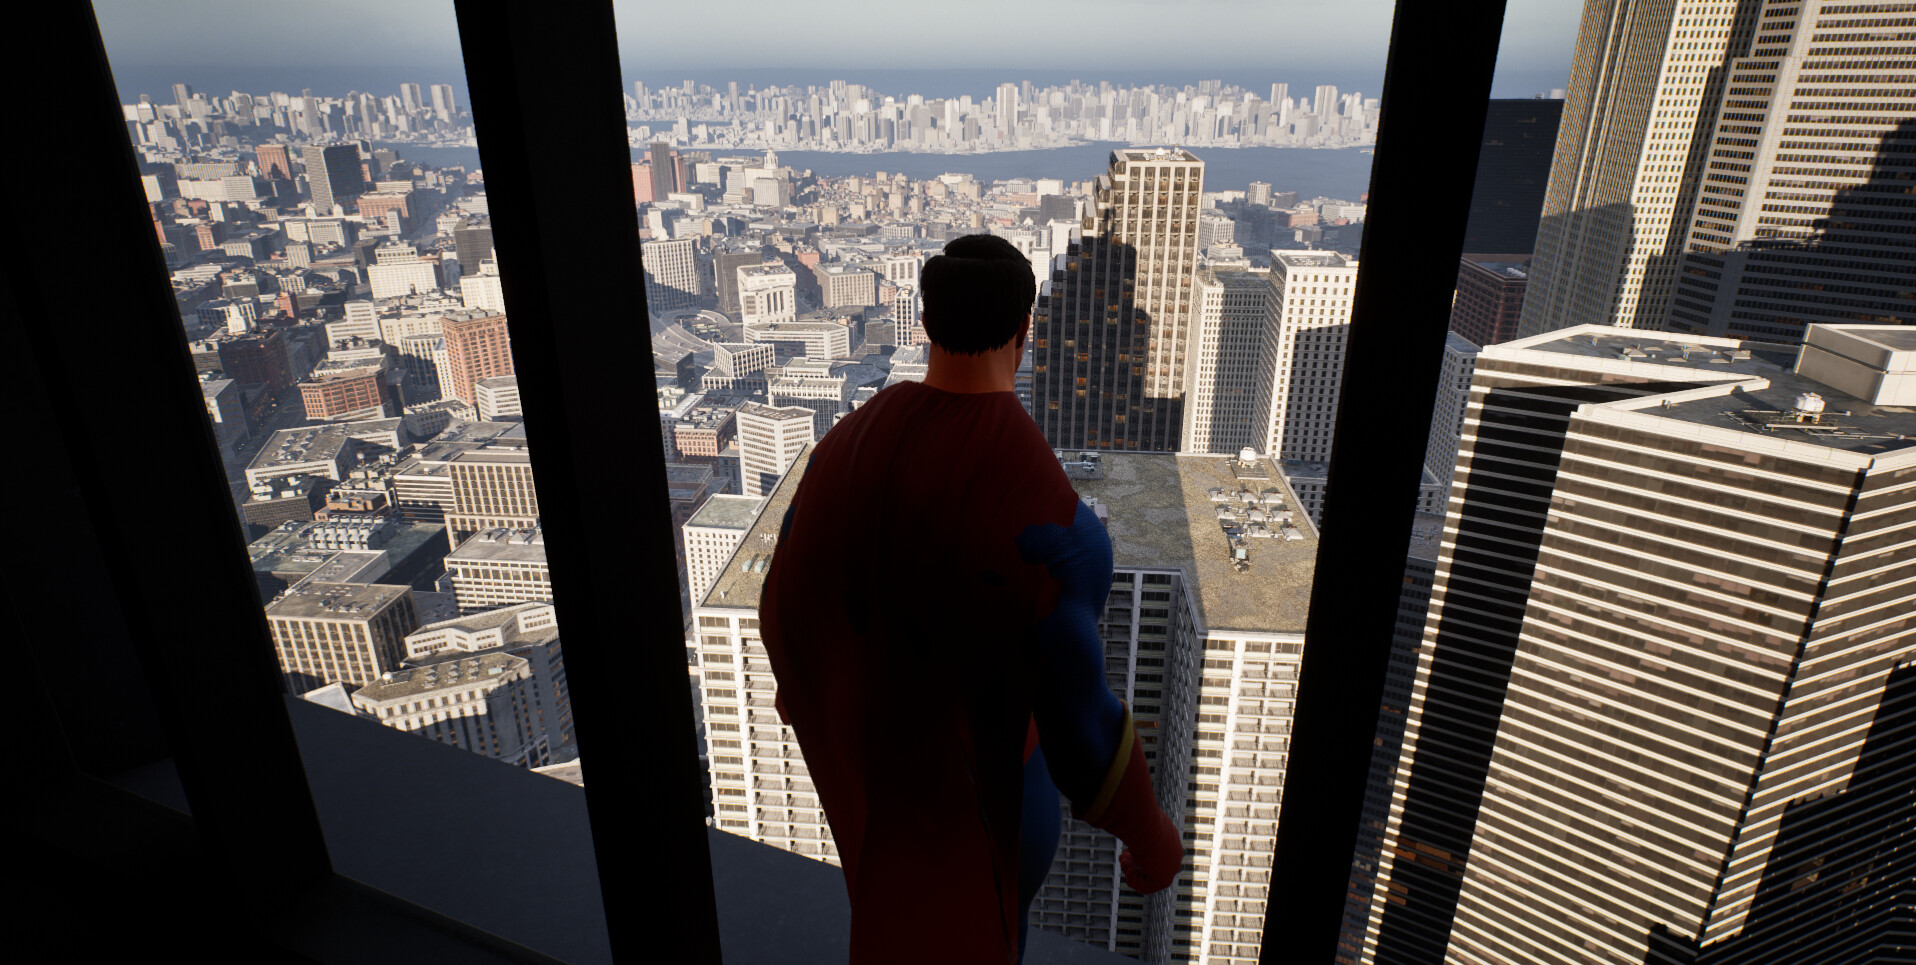 Heroes City Superman Edition Free Download